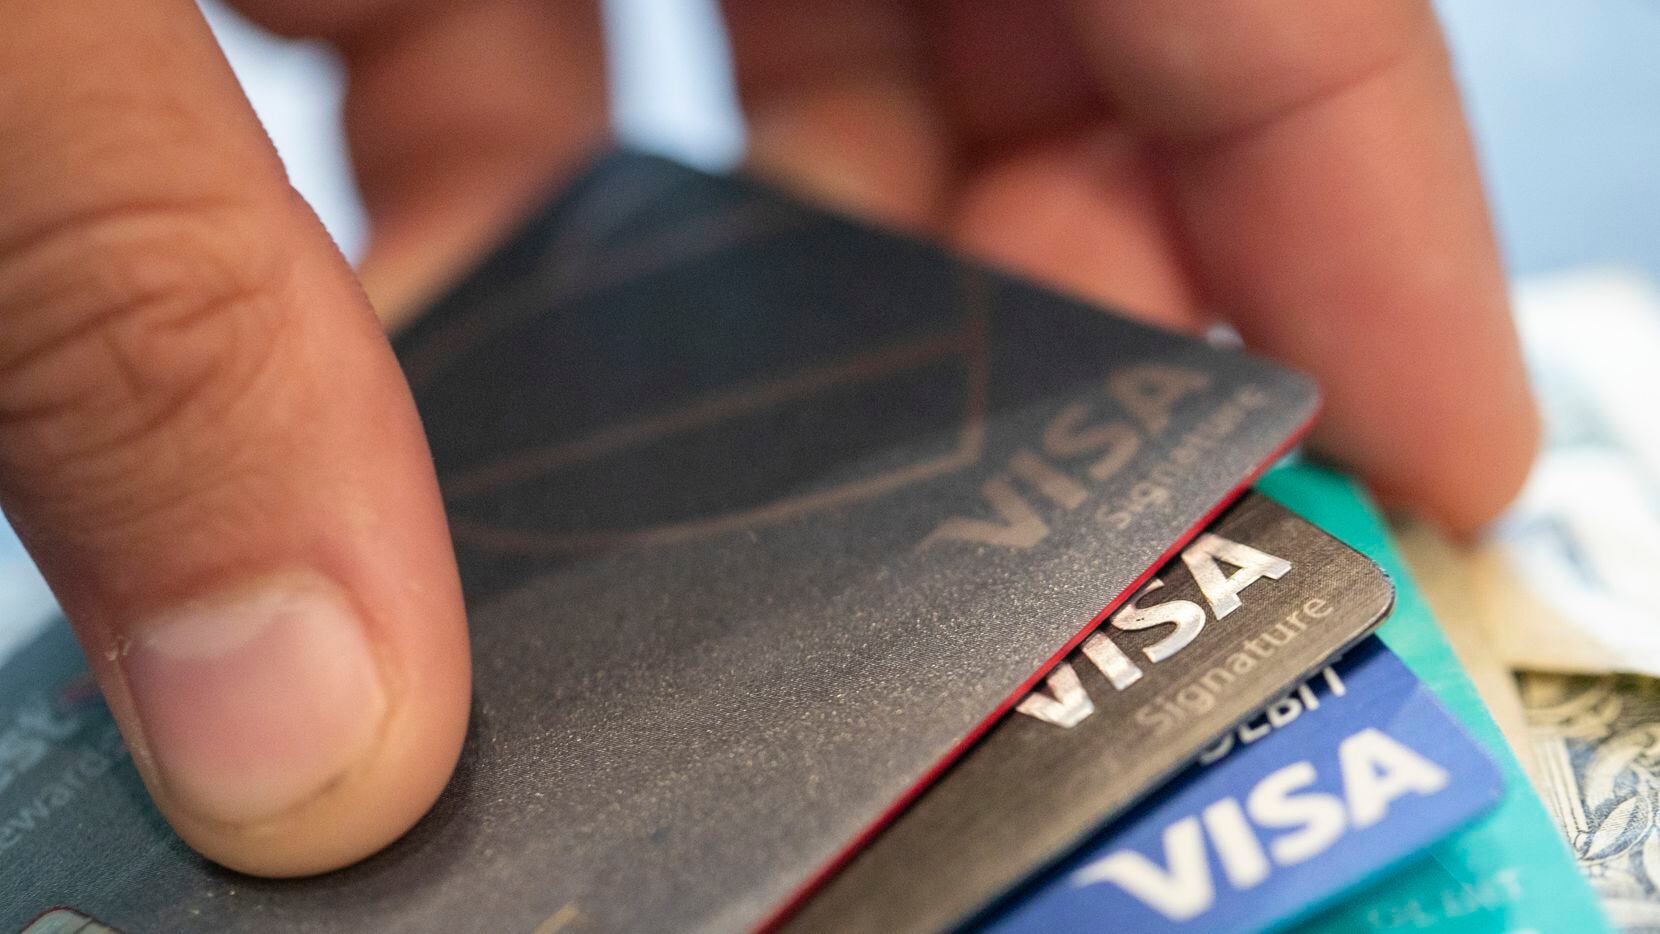 FILE - This Aug. 11, 2019 file photo shows Visa credit cards in New Orleans. Even if your...